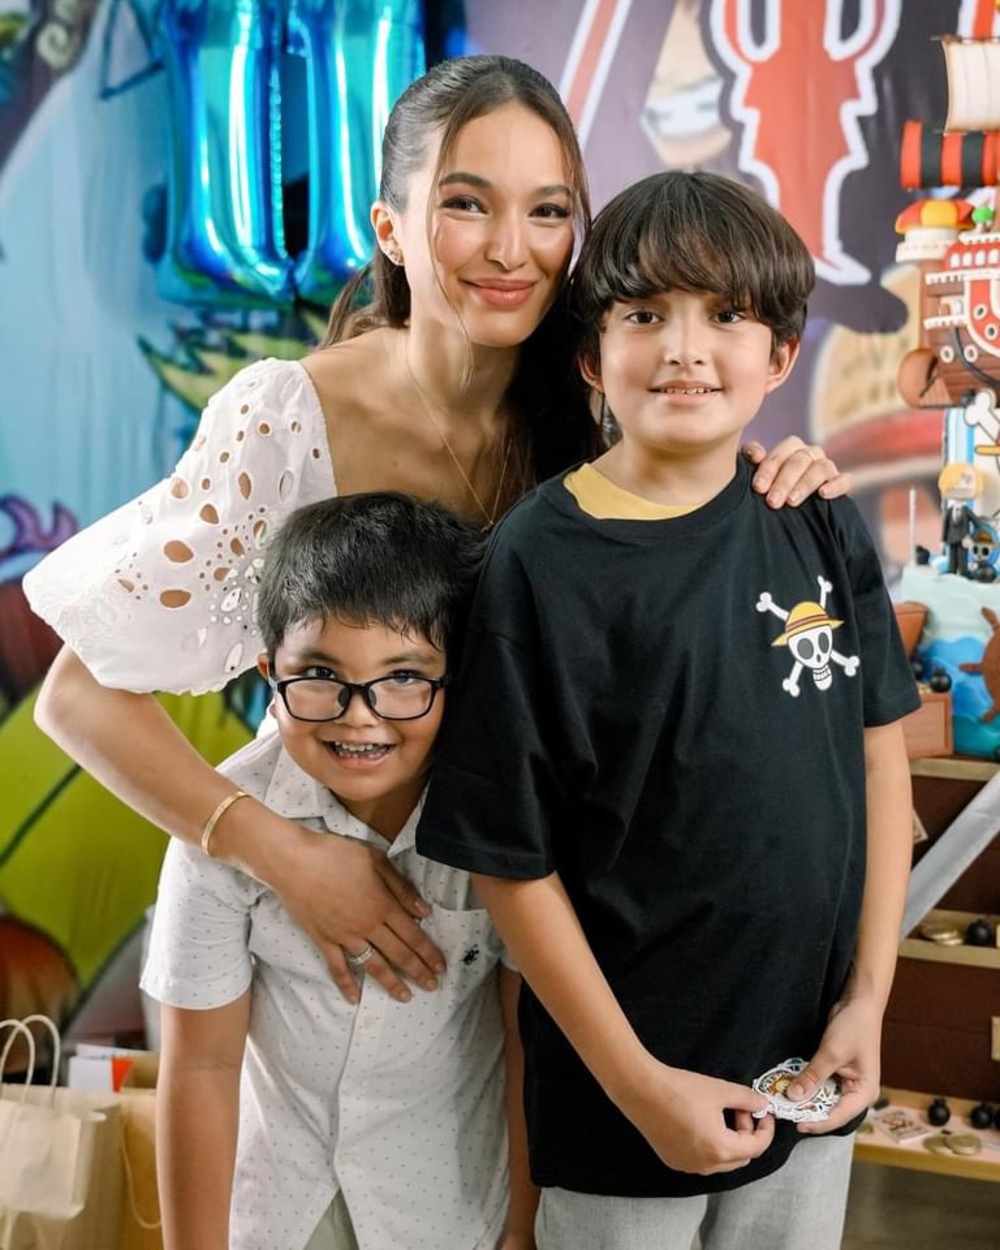 Sarah Lahbati makes firstborn son Zion Gutierrez's 11th birthday an unforgettable memory with One Piece-themed party.